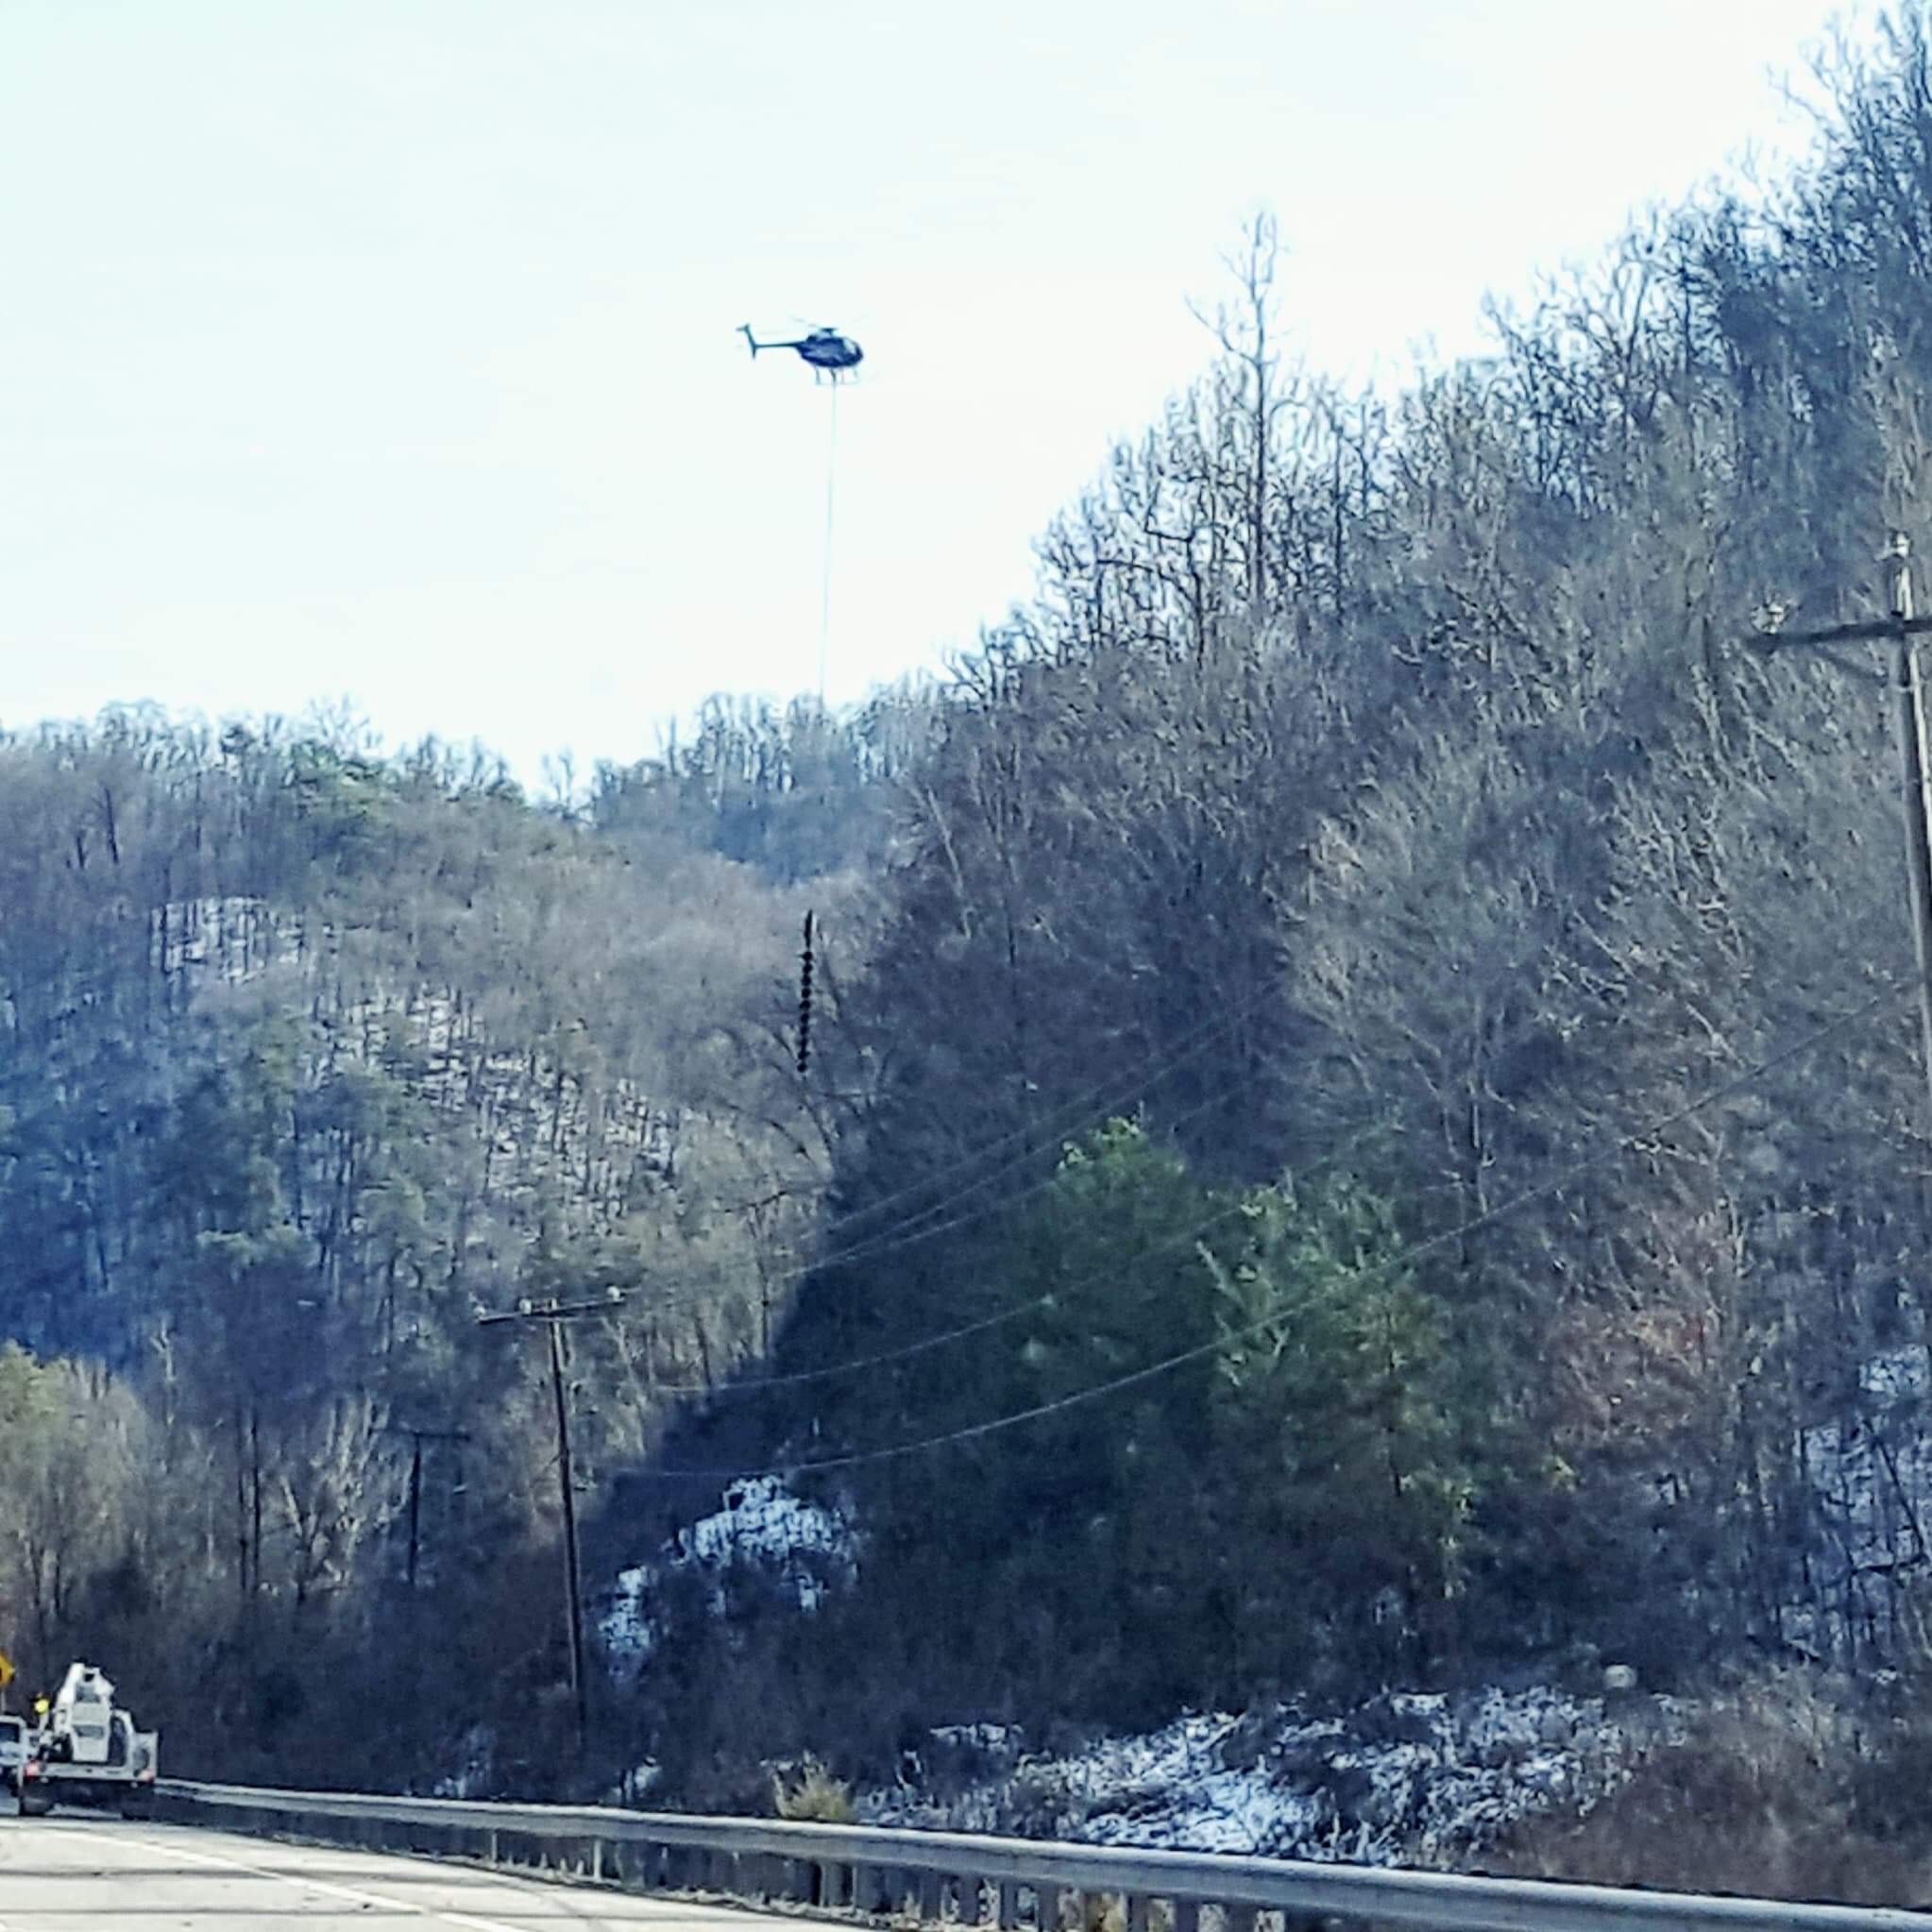 Outside my window I cannot believe … A helicopter cutting down trees along Highway 25E between Harrogate, TN and Jefferson City, TN.